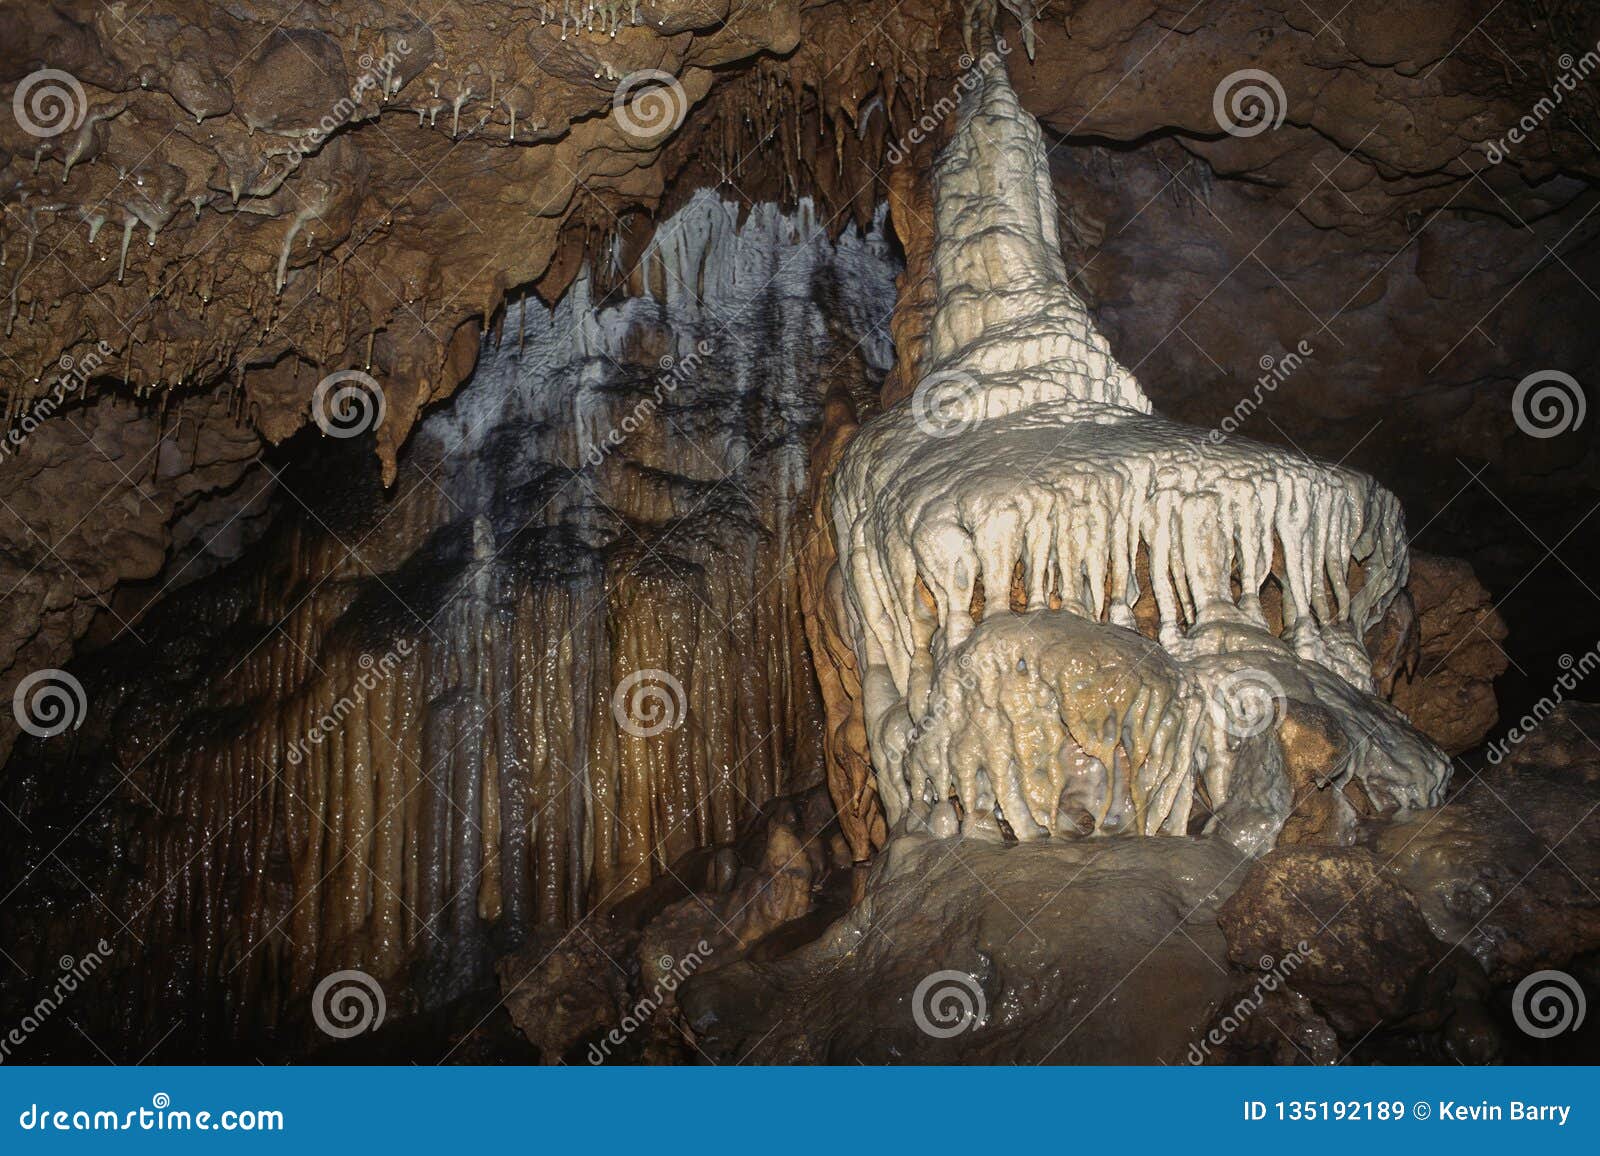 a formation at florida caverns state park known as the wedding cake